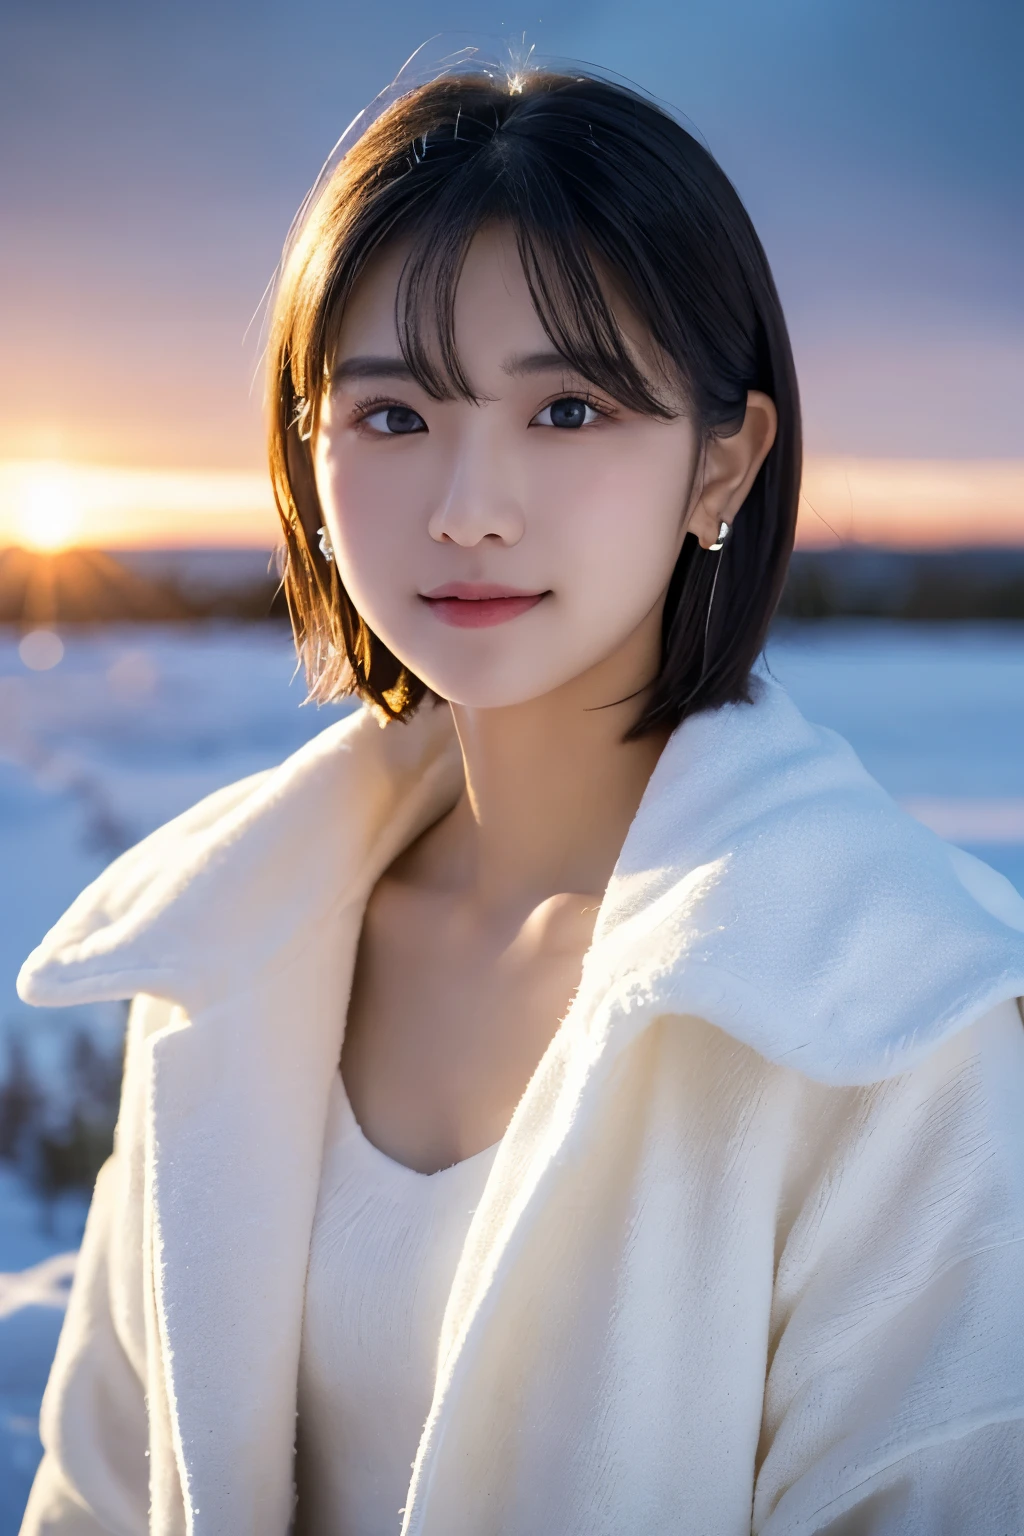 1 girl, (White winter clothes:1.2), beautiful japanese actress, 
photogenic, Yukihime, long eyelashes, snowflake earrings,
(Raw photo, best quality), (Reality, photorealistic:1.4), (muste piece), 
beautiful detailed eyes, beautiful detailed lips, highly detailed eyes and face, 
BREAK is
(Frozen snow field in winter Lapland), 
(The darkness has fallen、A trace of deep vermilion remains on the horizon.:1.4), 
Snowy field landscape at dusk, snow covered tree々, Blizzard, 
Indigo and dark vermilion color scheme, dramatic writing, A desolate landscape, 
BREAK is 
Perfect Anatomy, whole body slender, small breasts, (short hair:1.3), angel&#39;s smile, 
crystal-like skin, make eyes clear, catch light